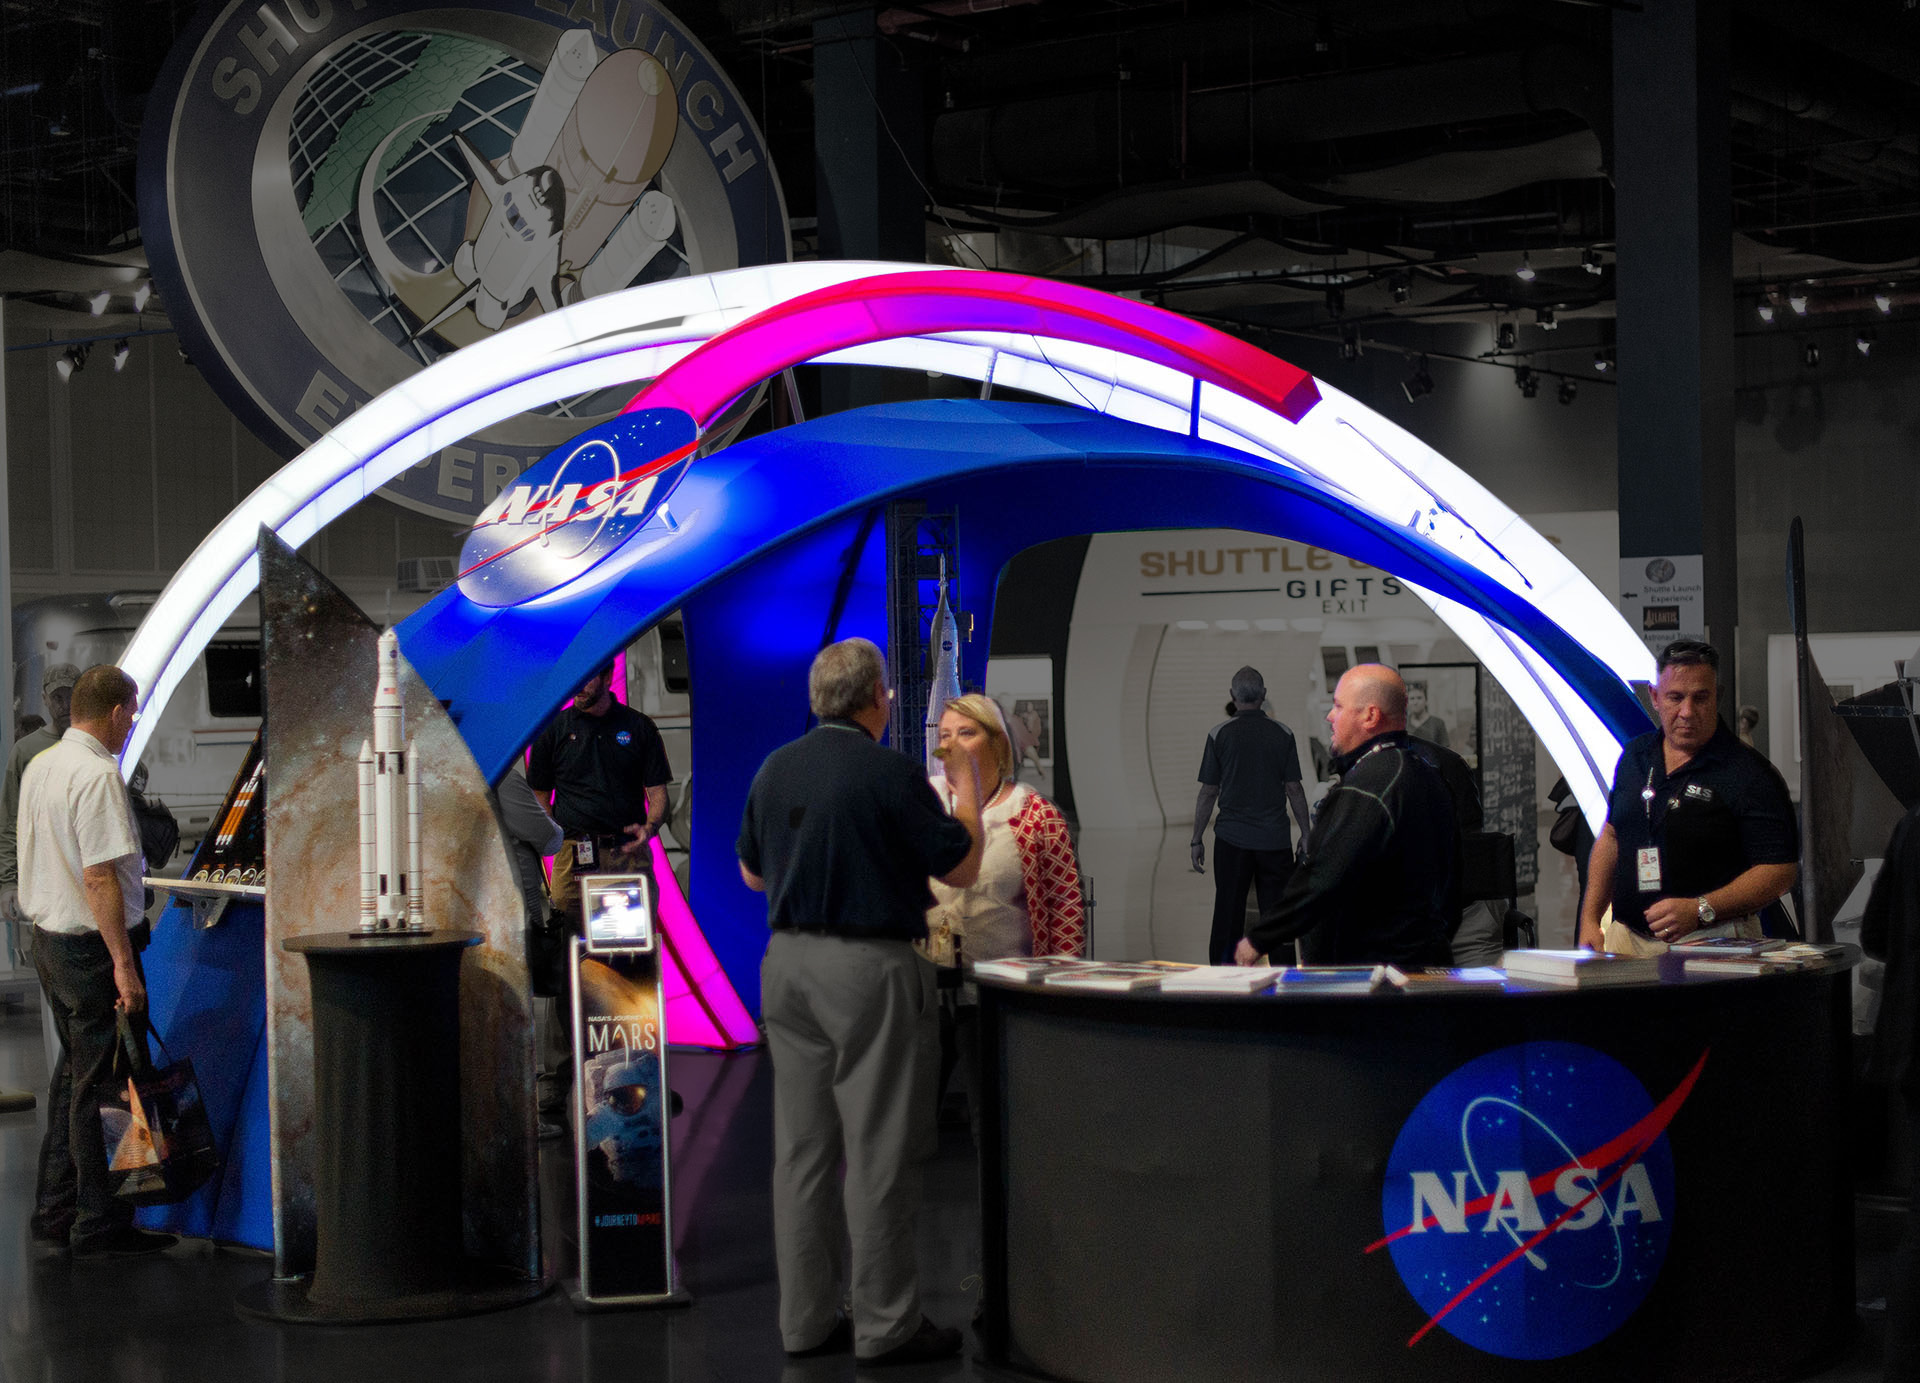 A NASA exhibit created by Media Fusion, featuring scale models, illuminated structures, and interactive kiosks